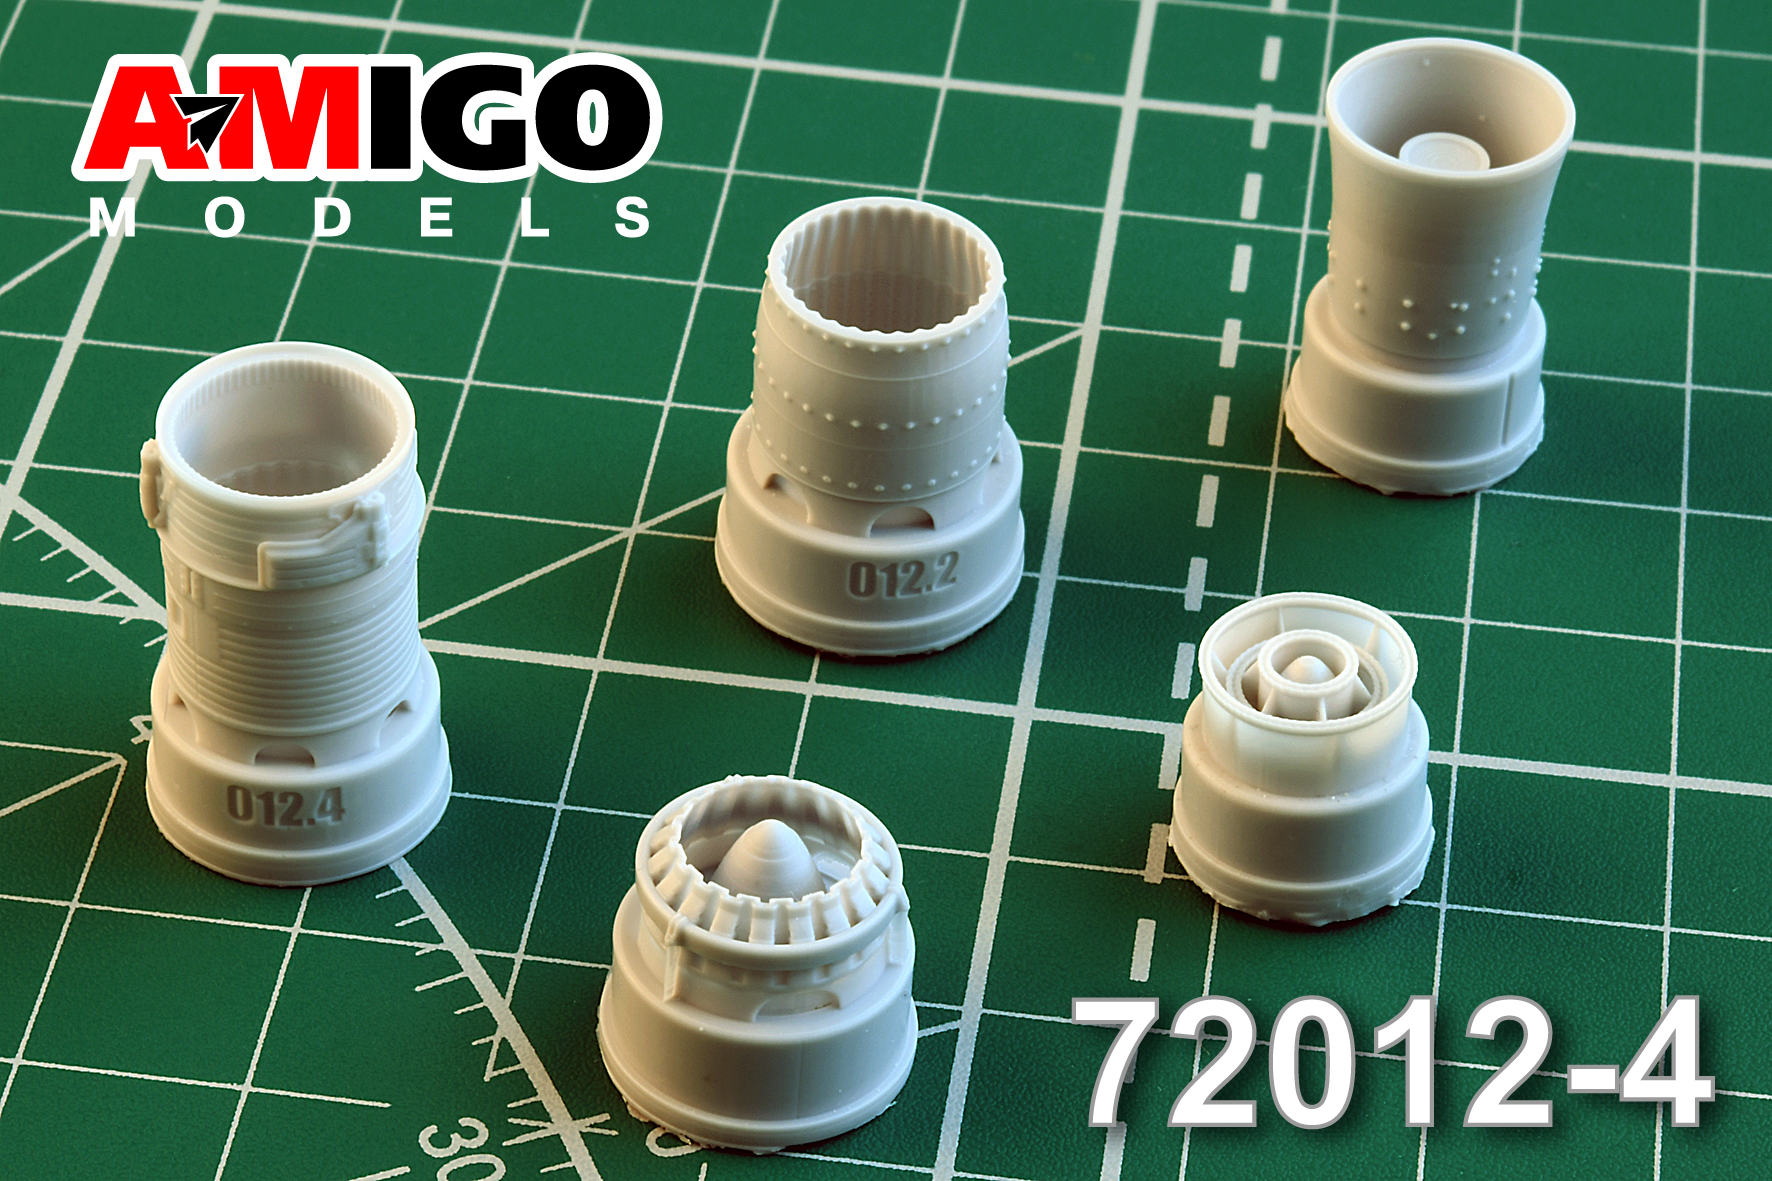 Additions (3D resin printing) 1/72 Jet nozzle of R13F-300 engine of MiG-21SMT (Amigo Models)